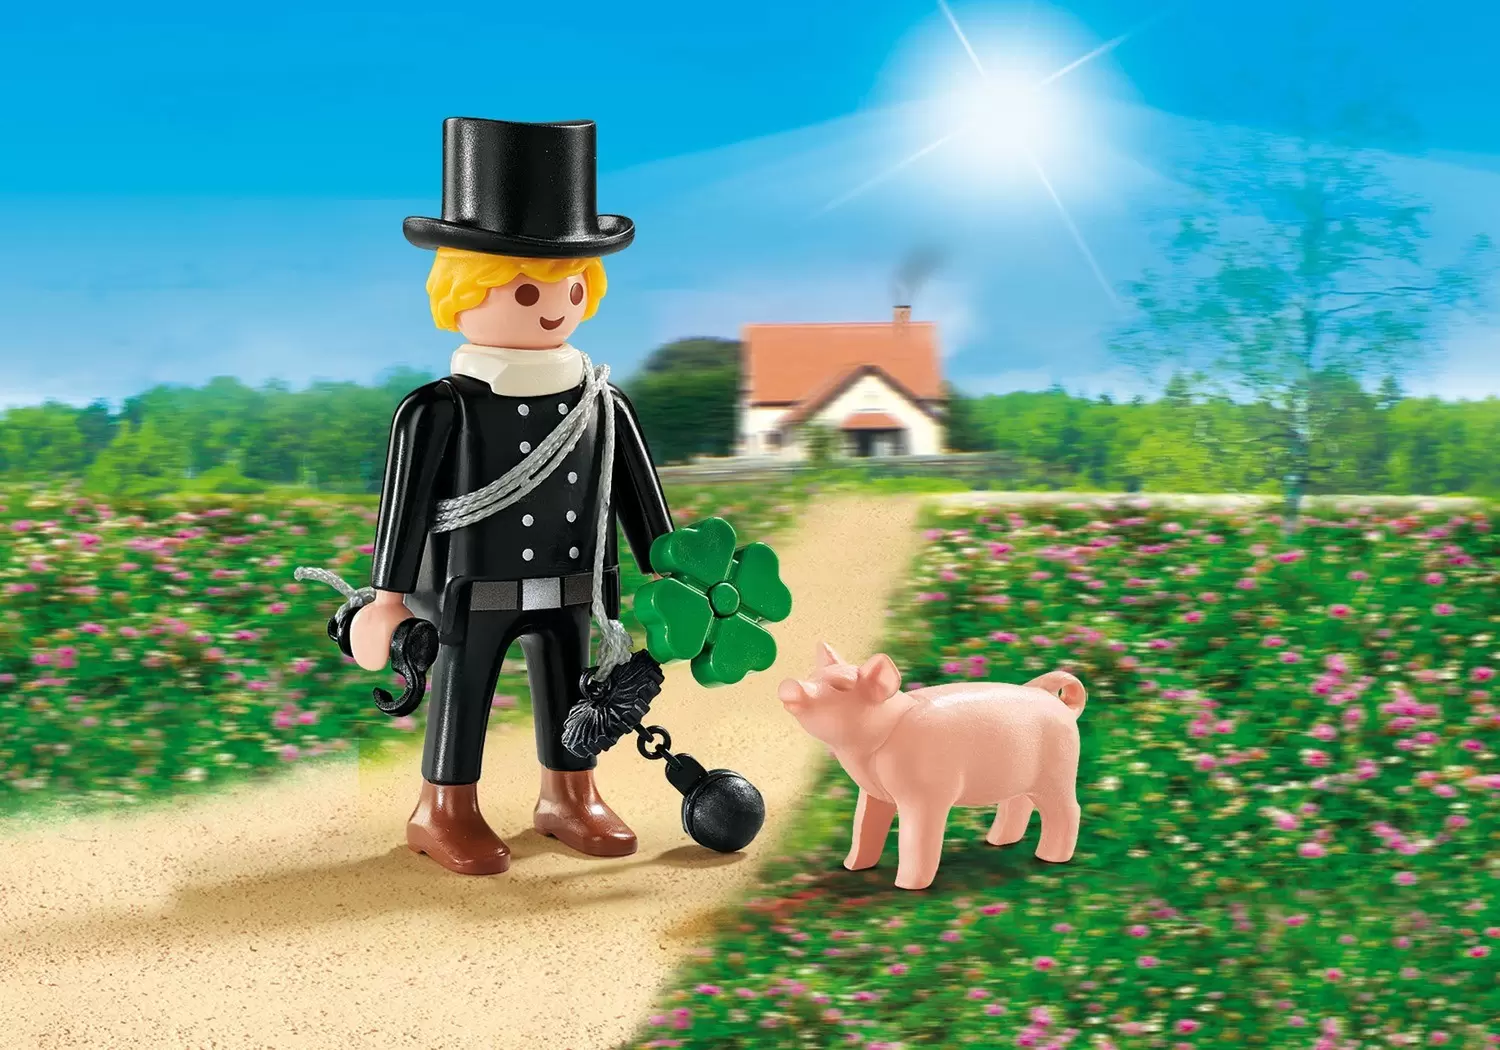 Playmobil Victorian - Chimney sweep with lucky pig